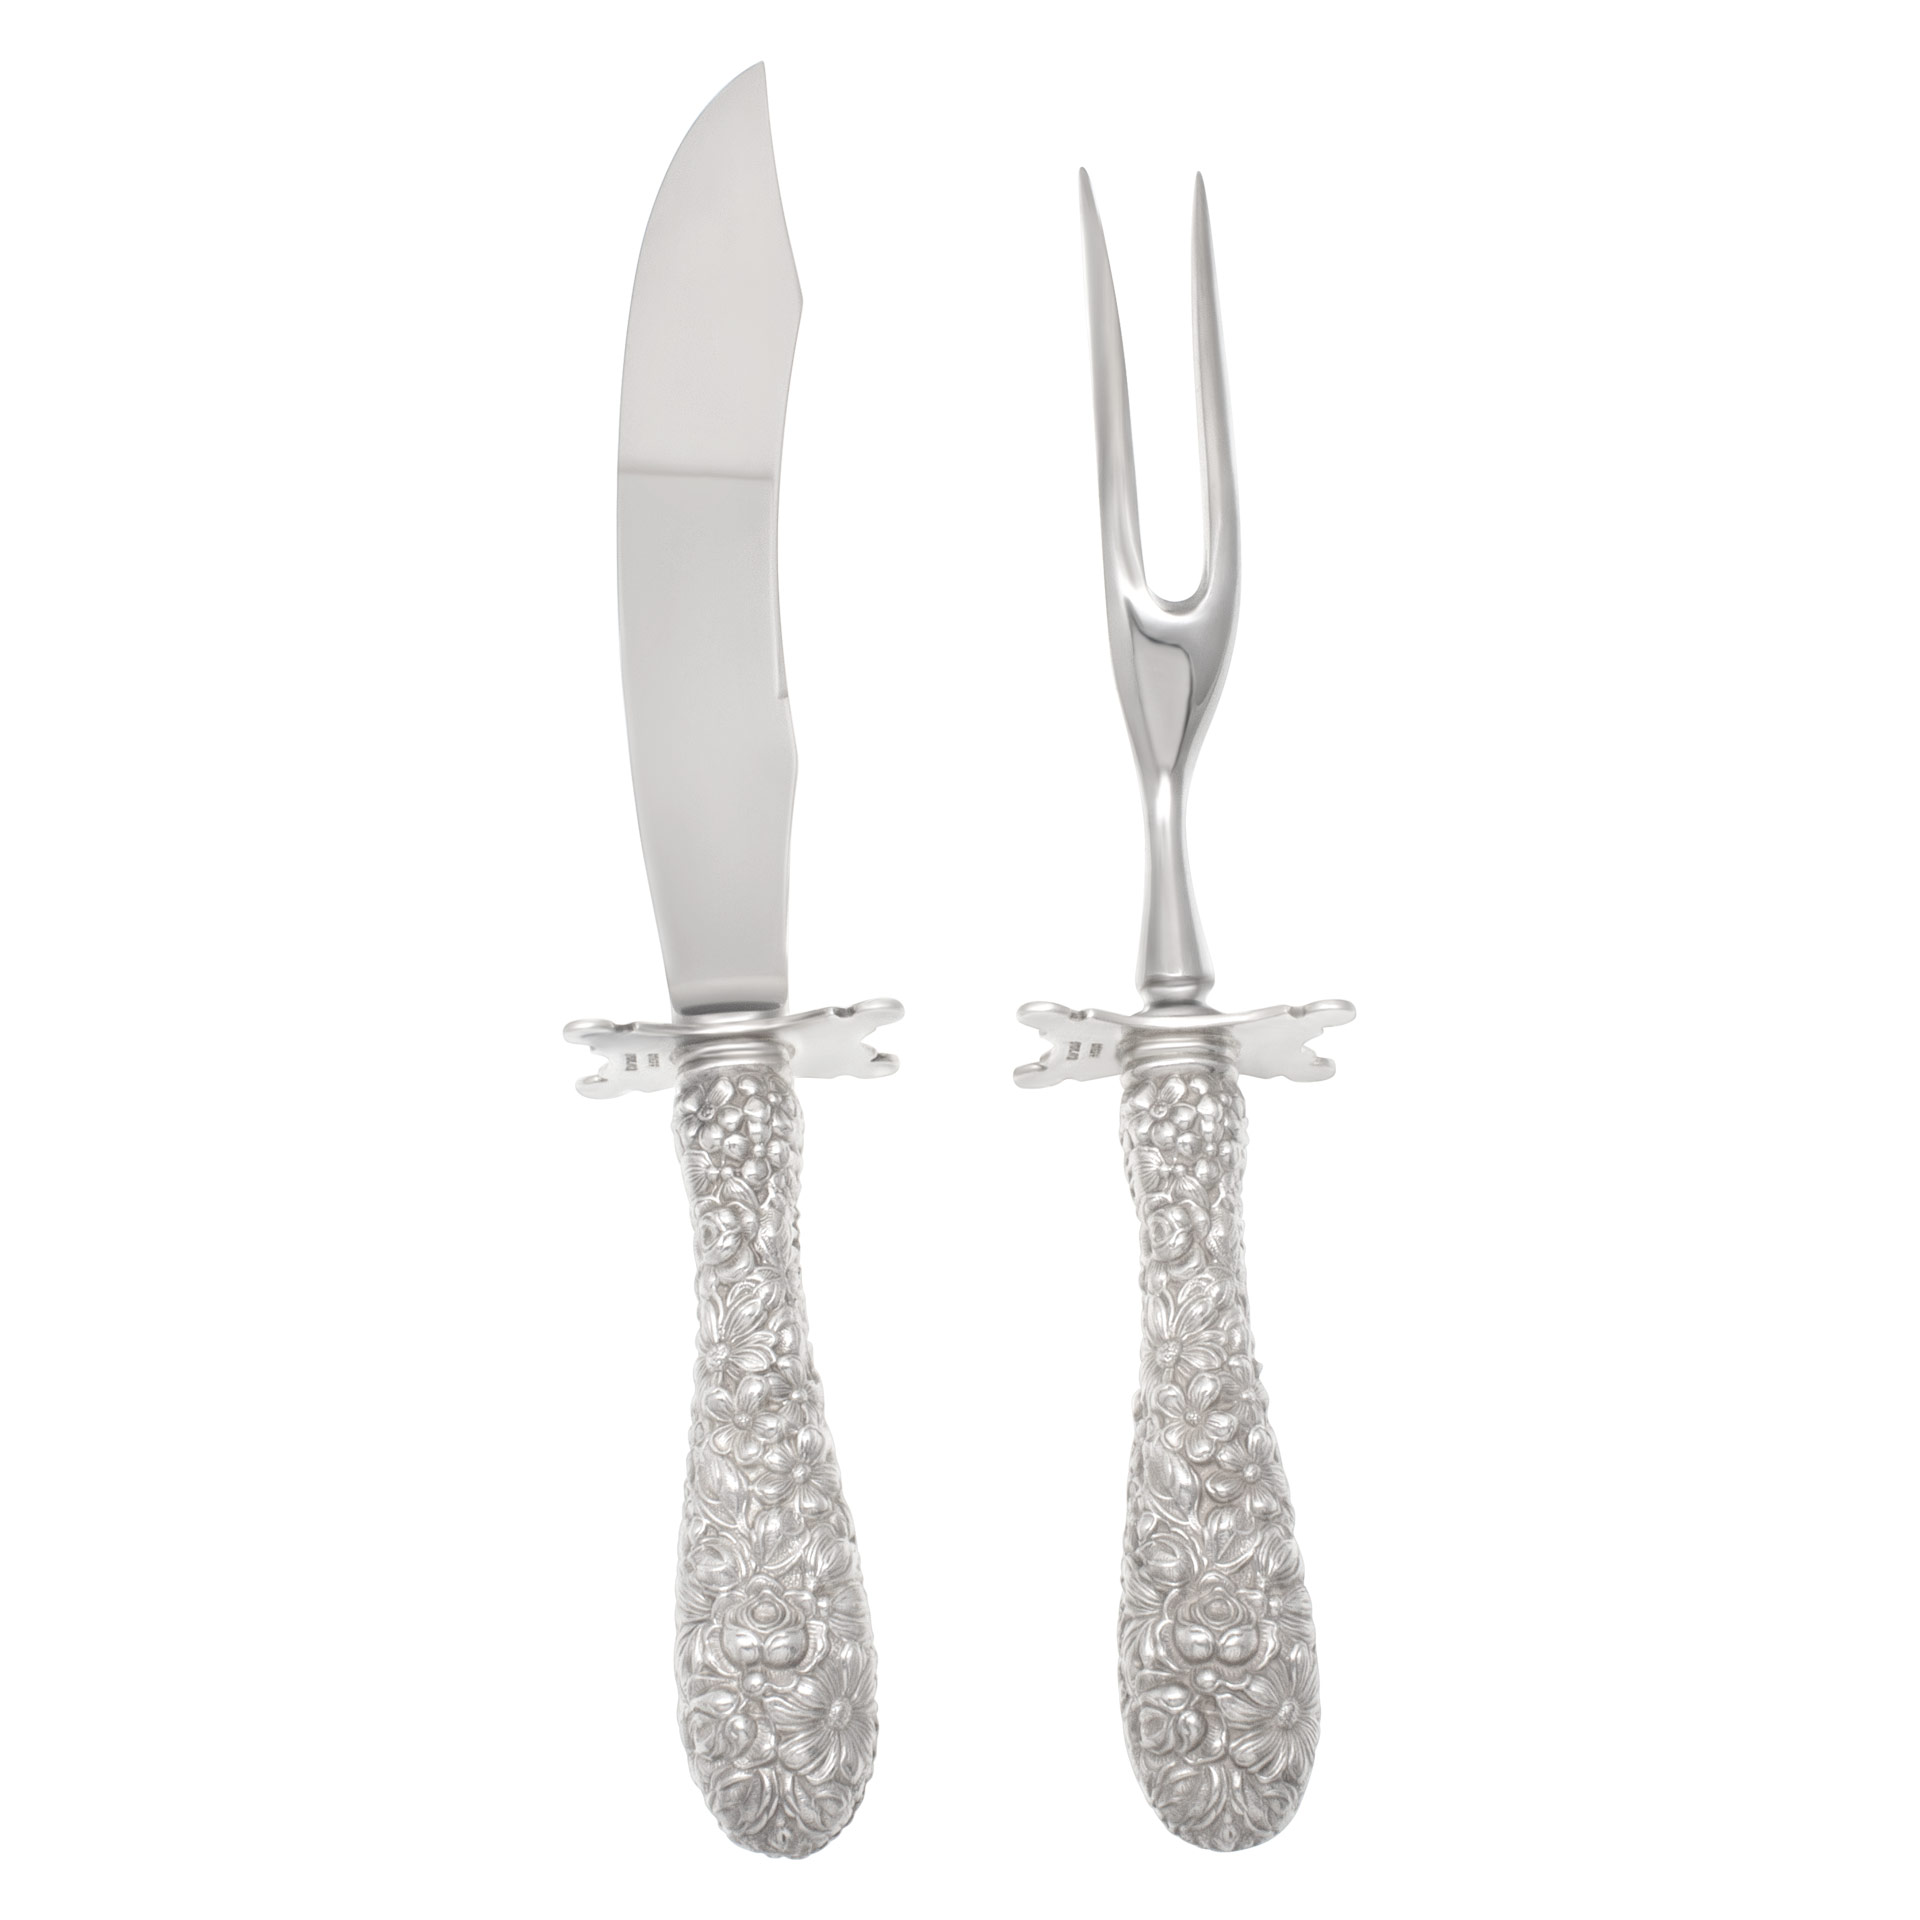 Rose by Stieff Sterling Silver Steak Carving Set 2-piece 9 3/4" 